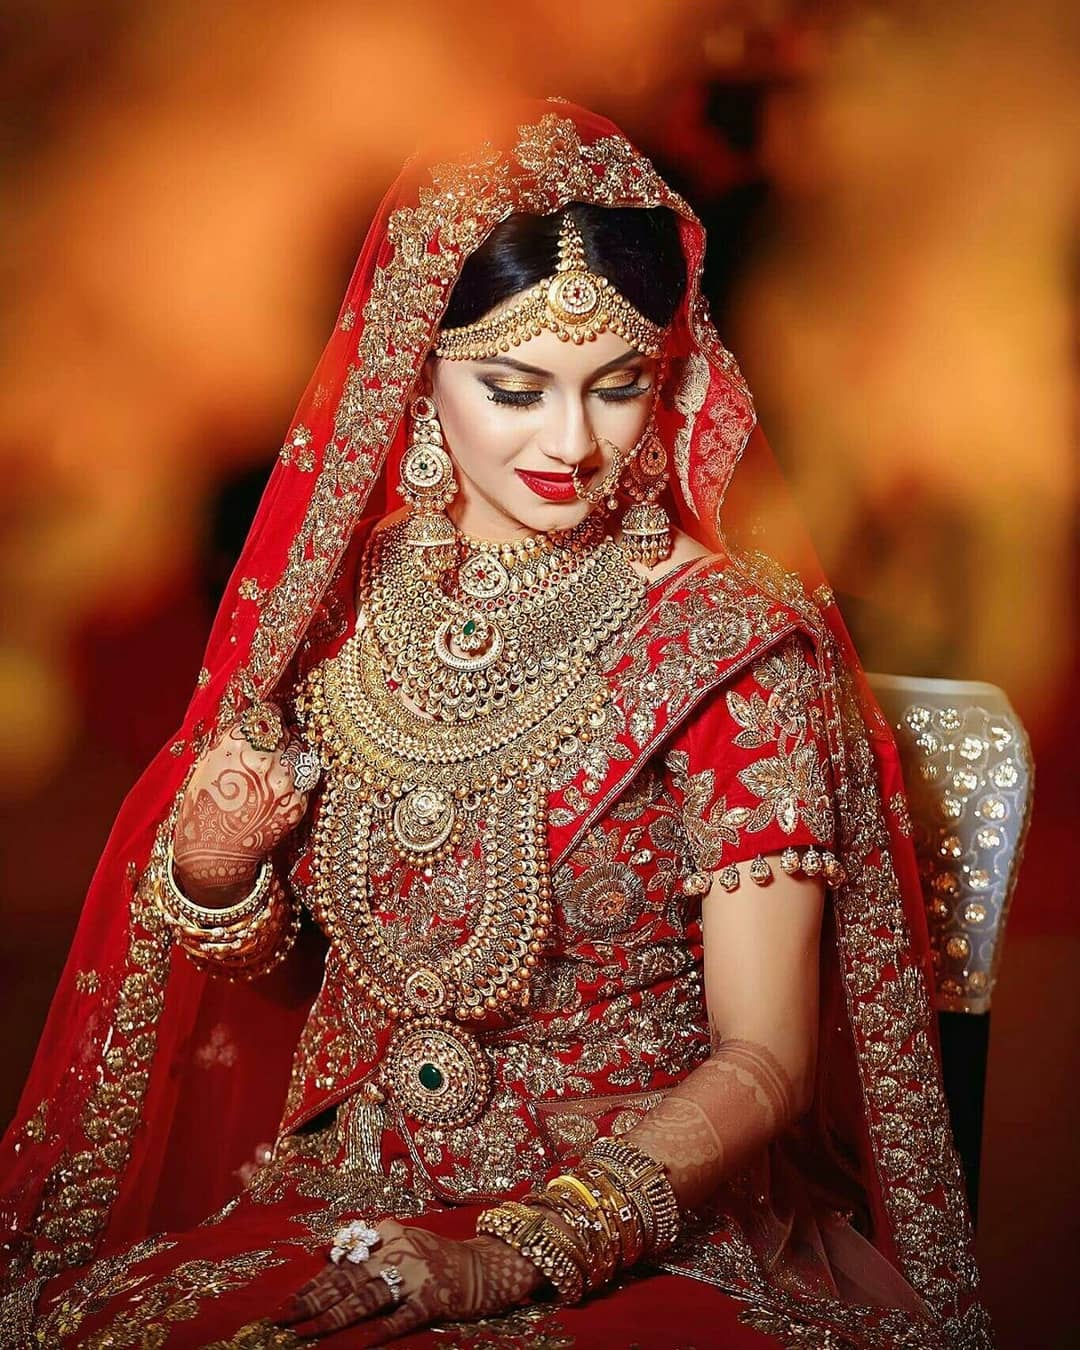 Our Favorite 51 Indian Bridal Makeup Looks 4840